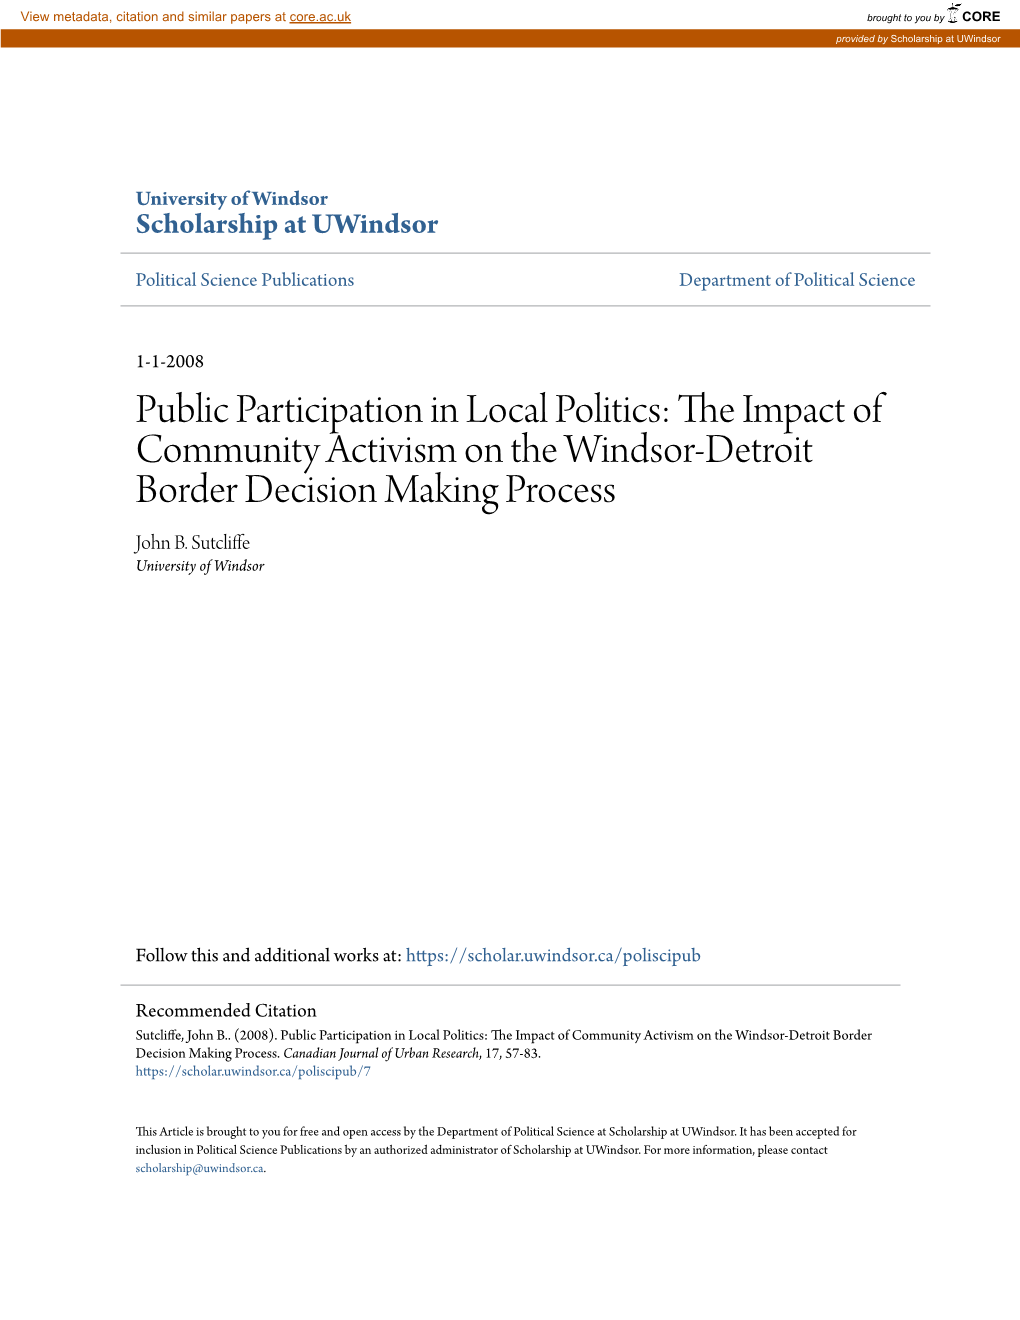 The Impact of Community Activism on the Windsor-Detroit Border Decision Making Process